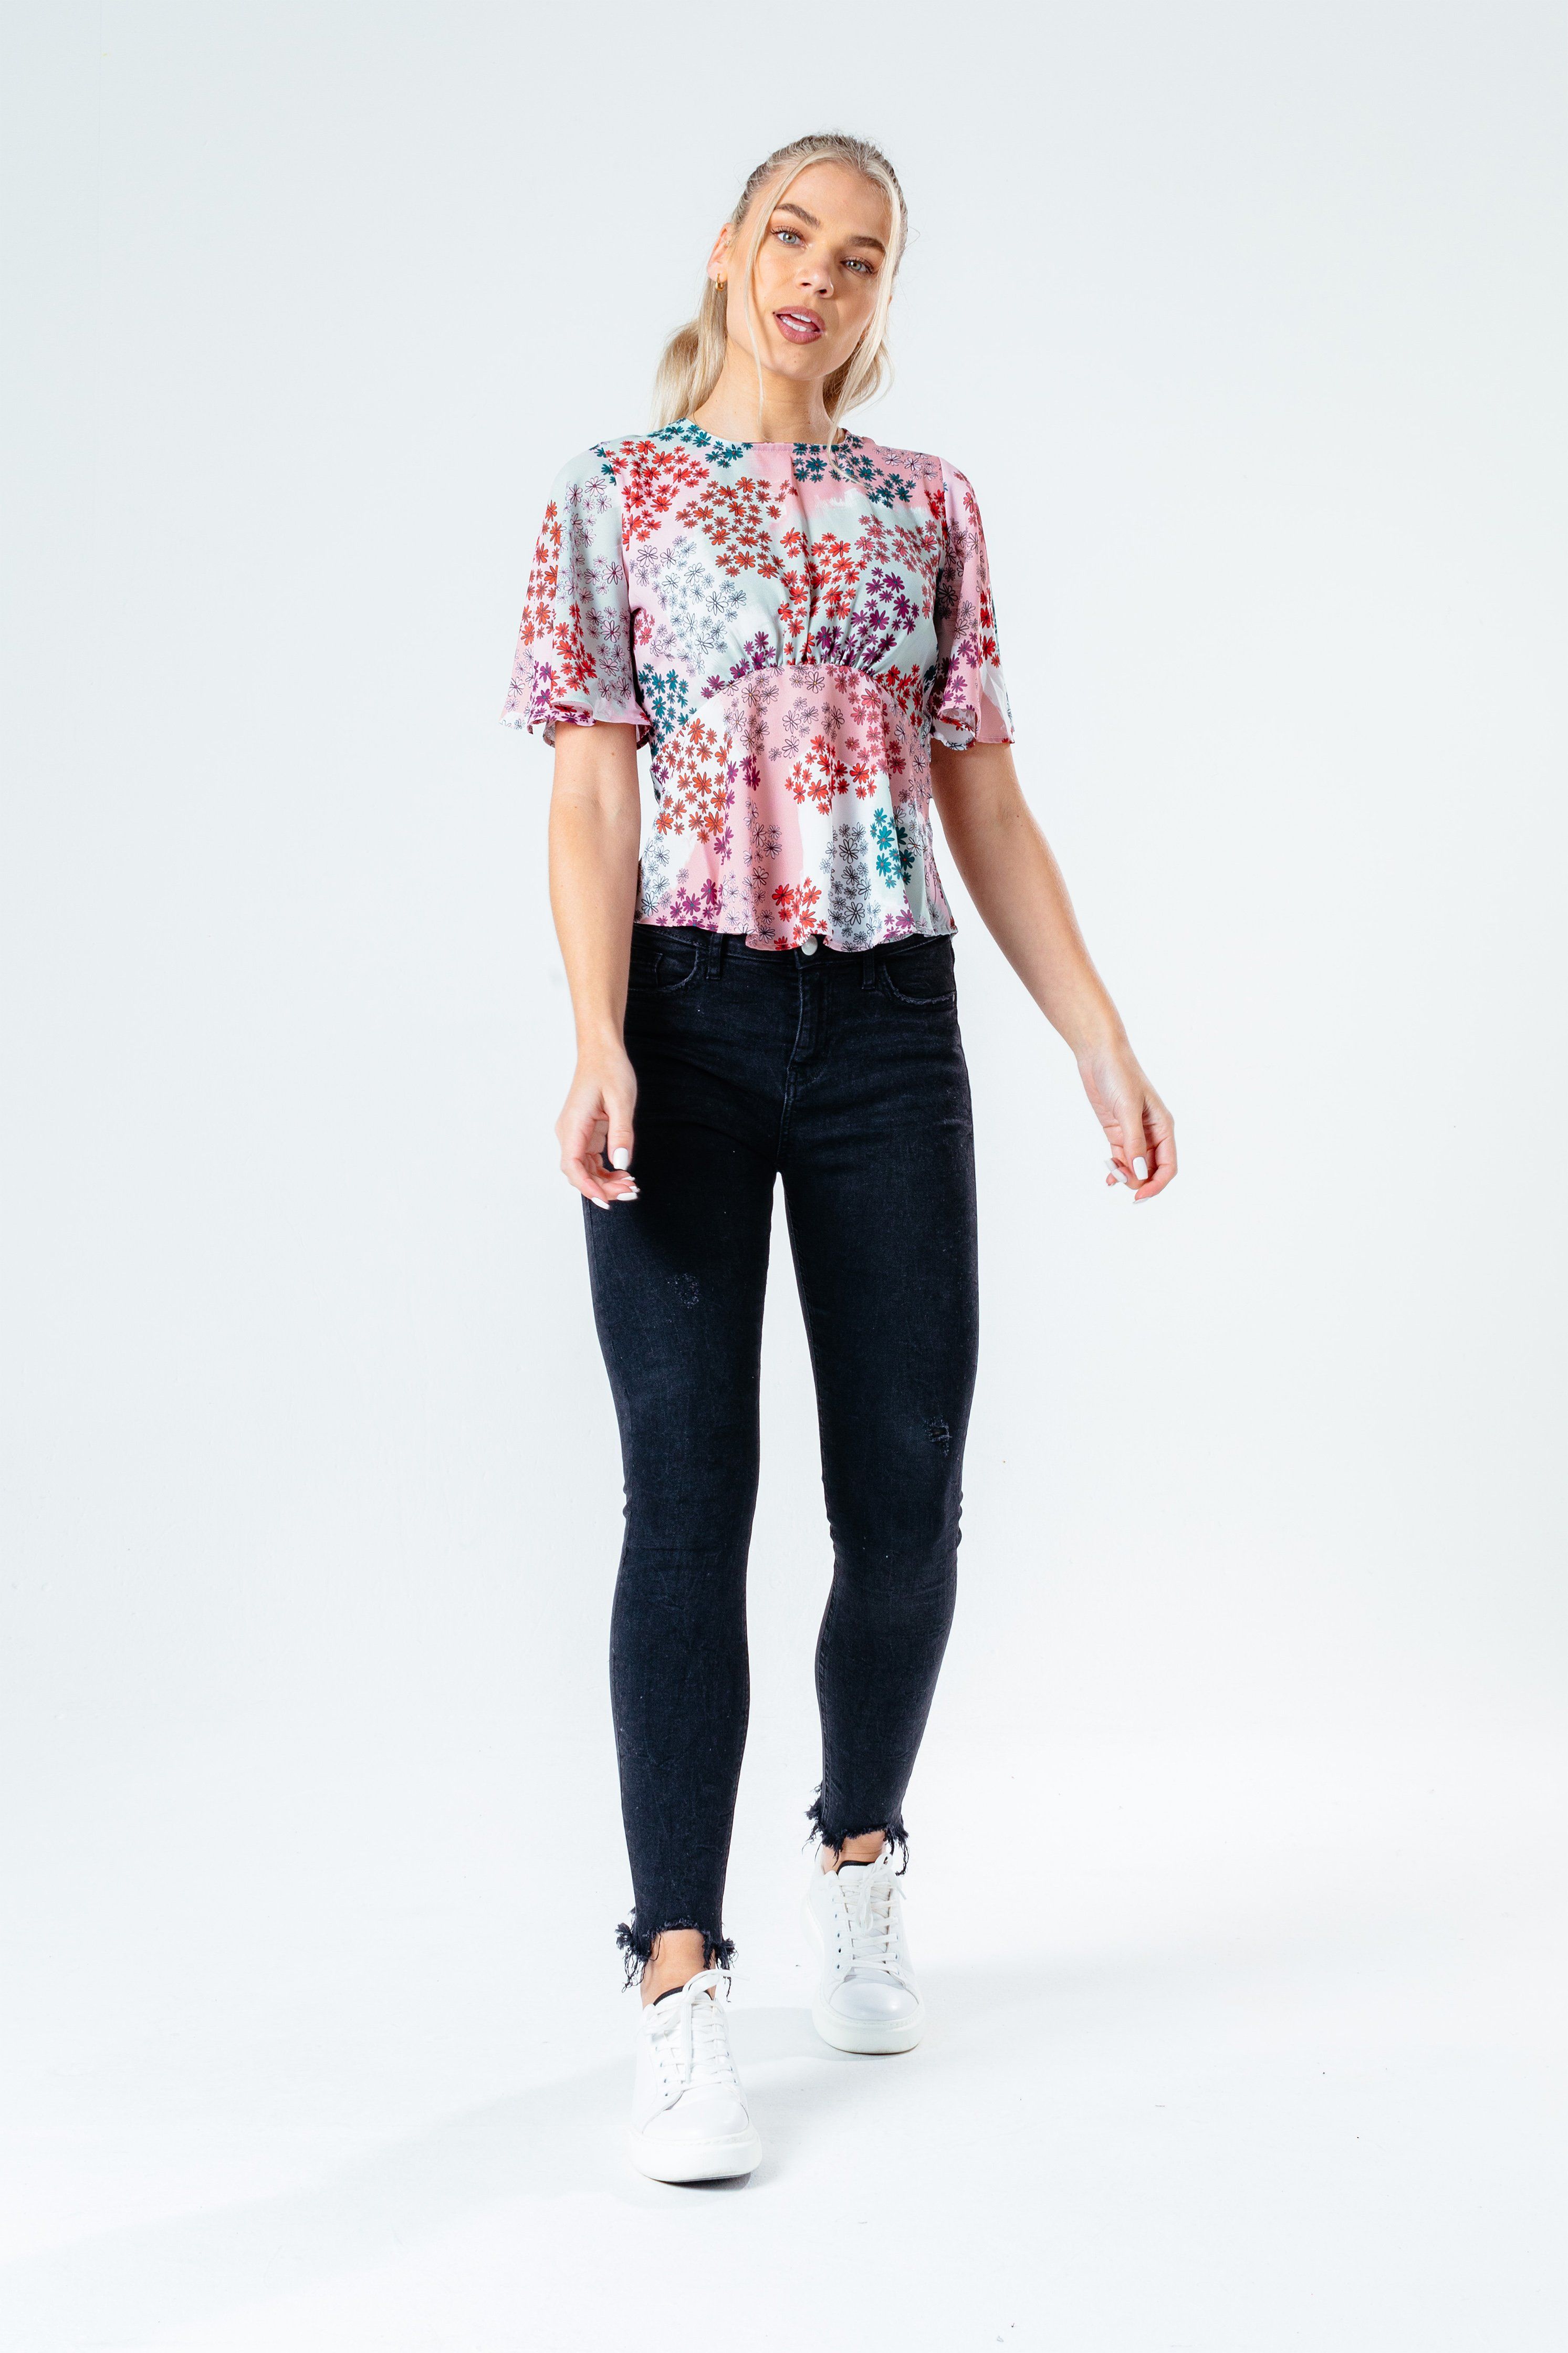 The HYPE. women's paint daisy blouse features a dusty pink, mint, purple and red colour palette. Designed in an all over floral inspired design in a poly fabric base for comfort and breathable space. In our standard women's eve blouse t-shirt shape and  short sleeves. Wear with high-waisted denim jeans for an everyday essential look. Machine washable.